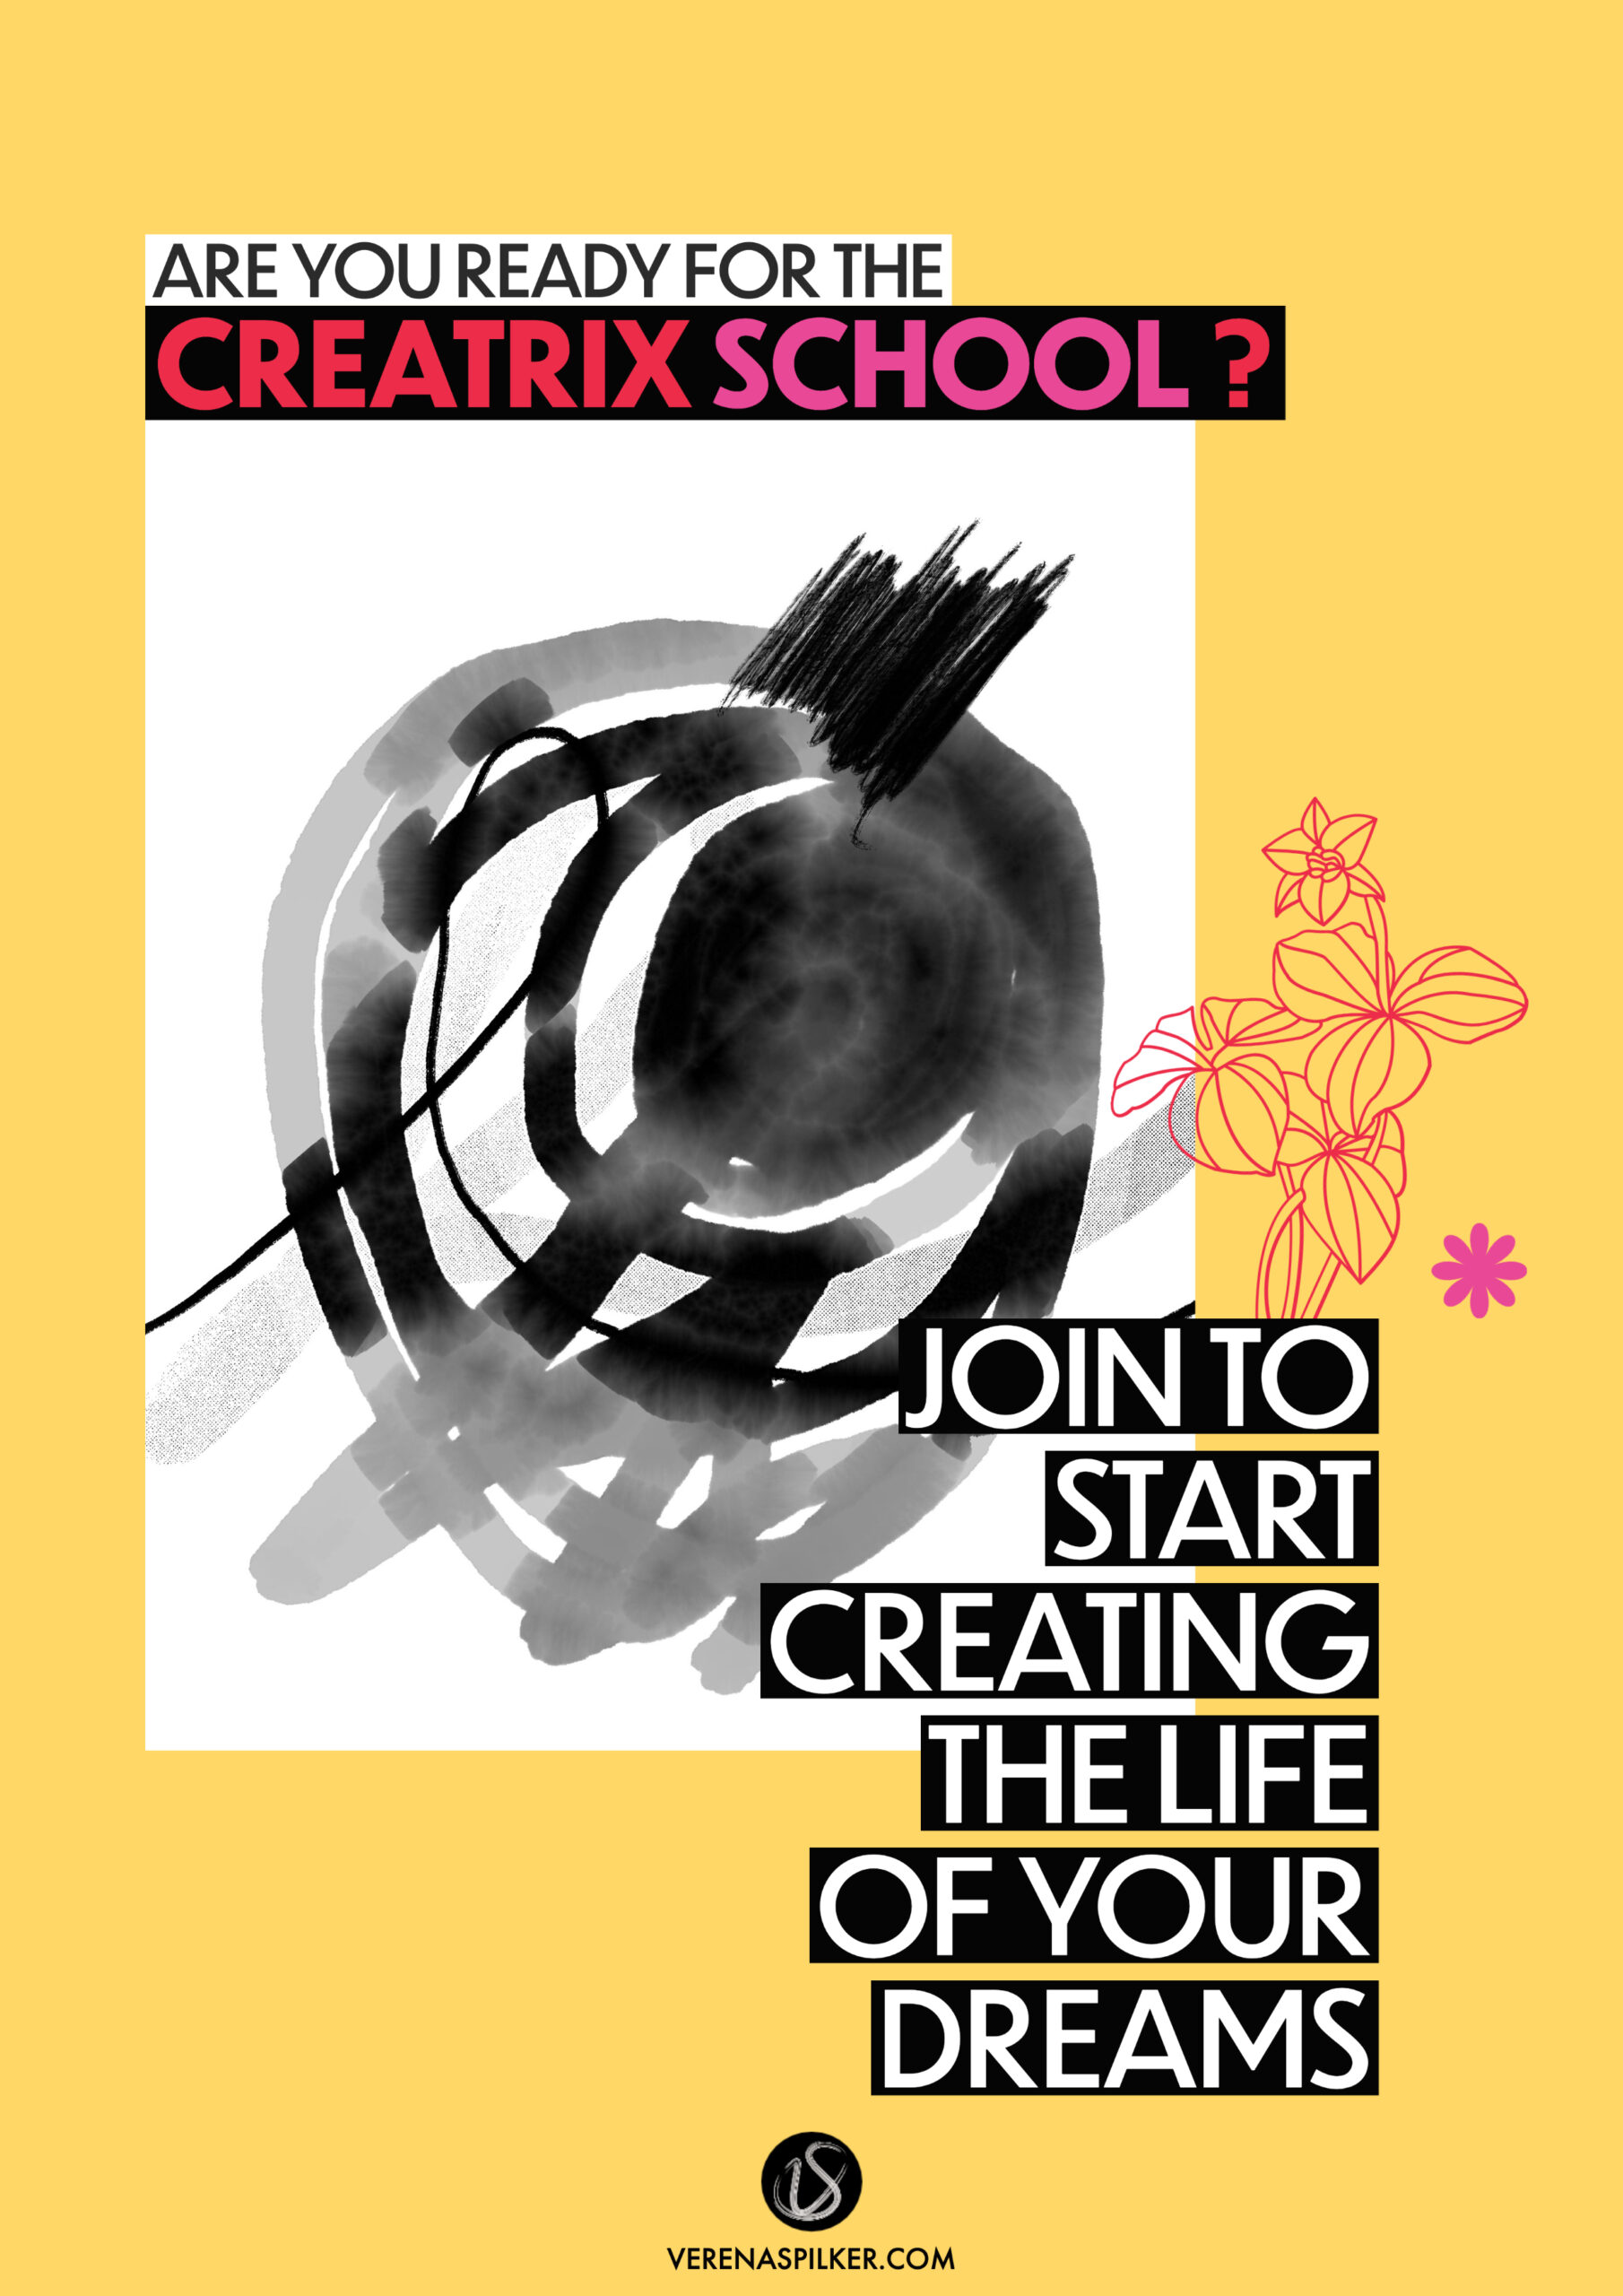 I AM CREATOR School - Join Now